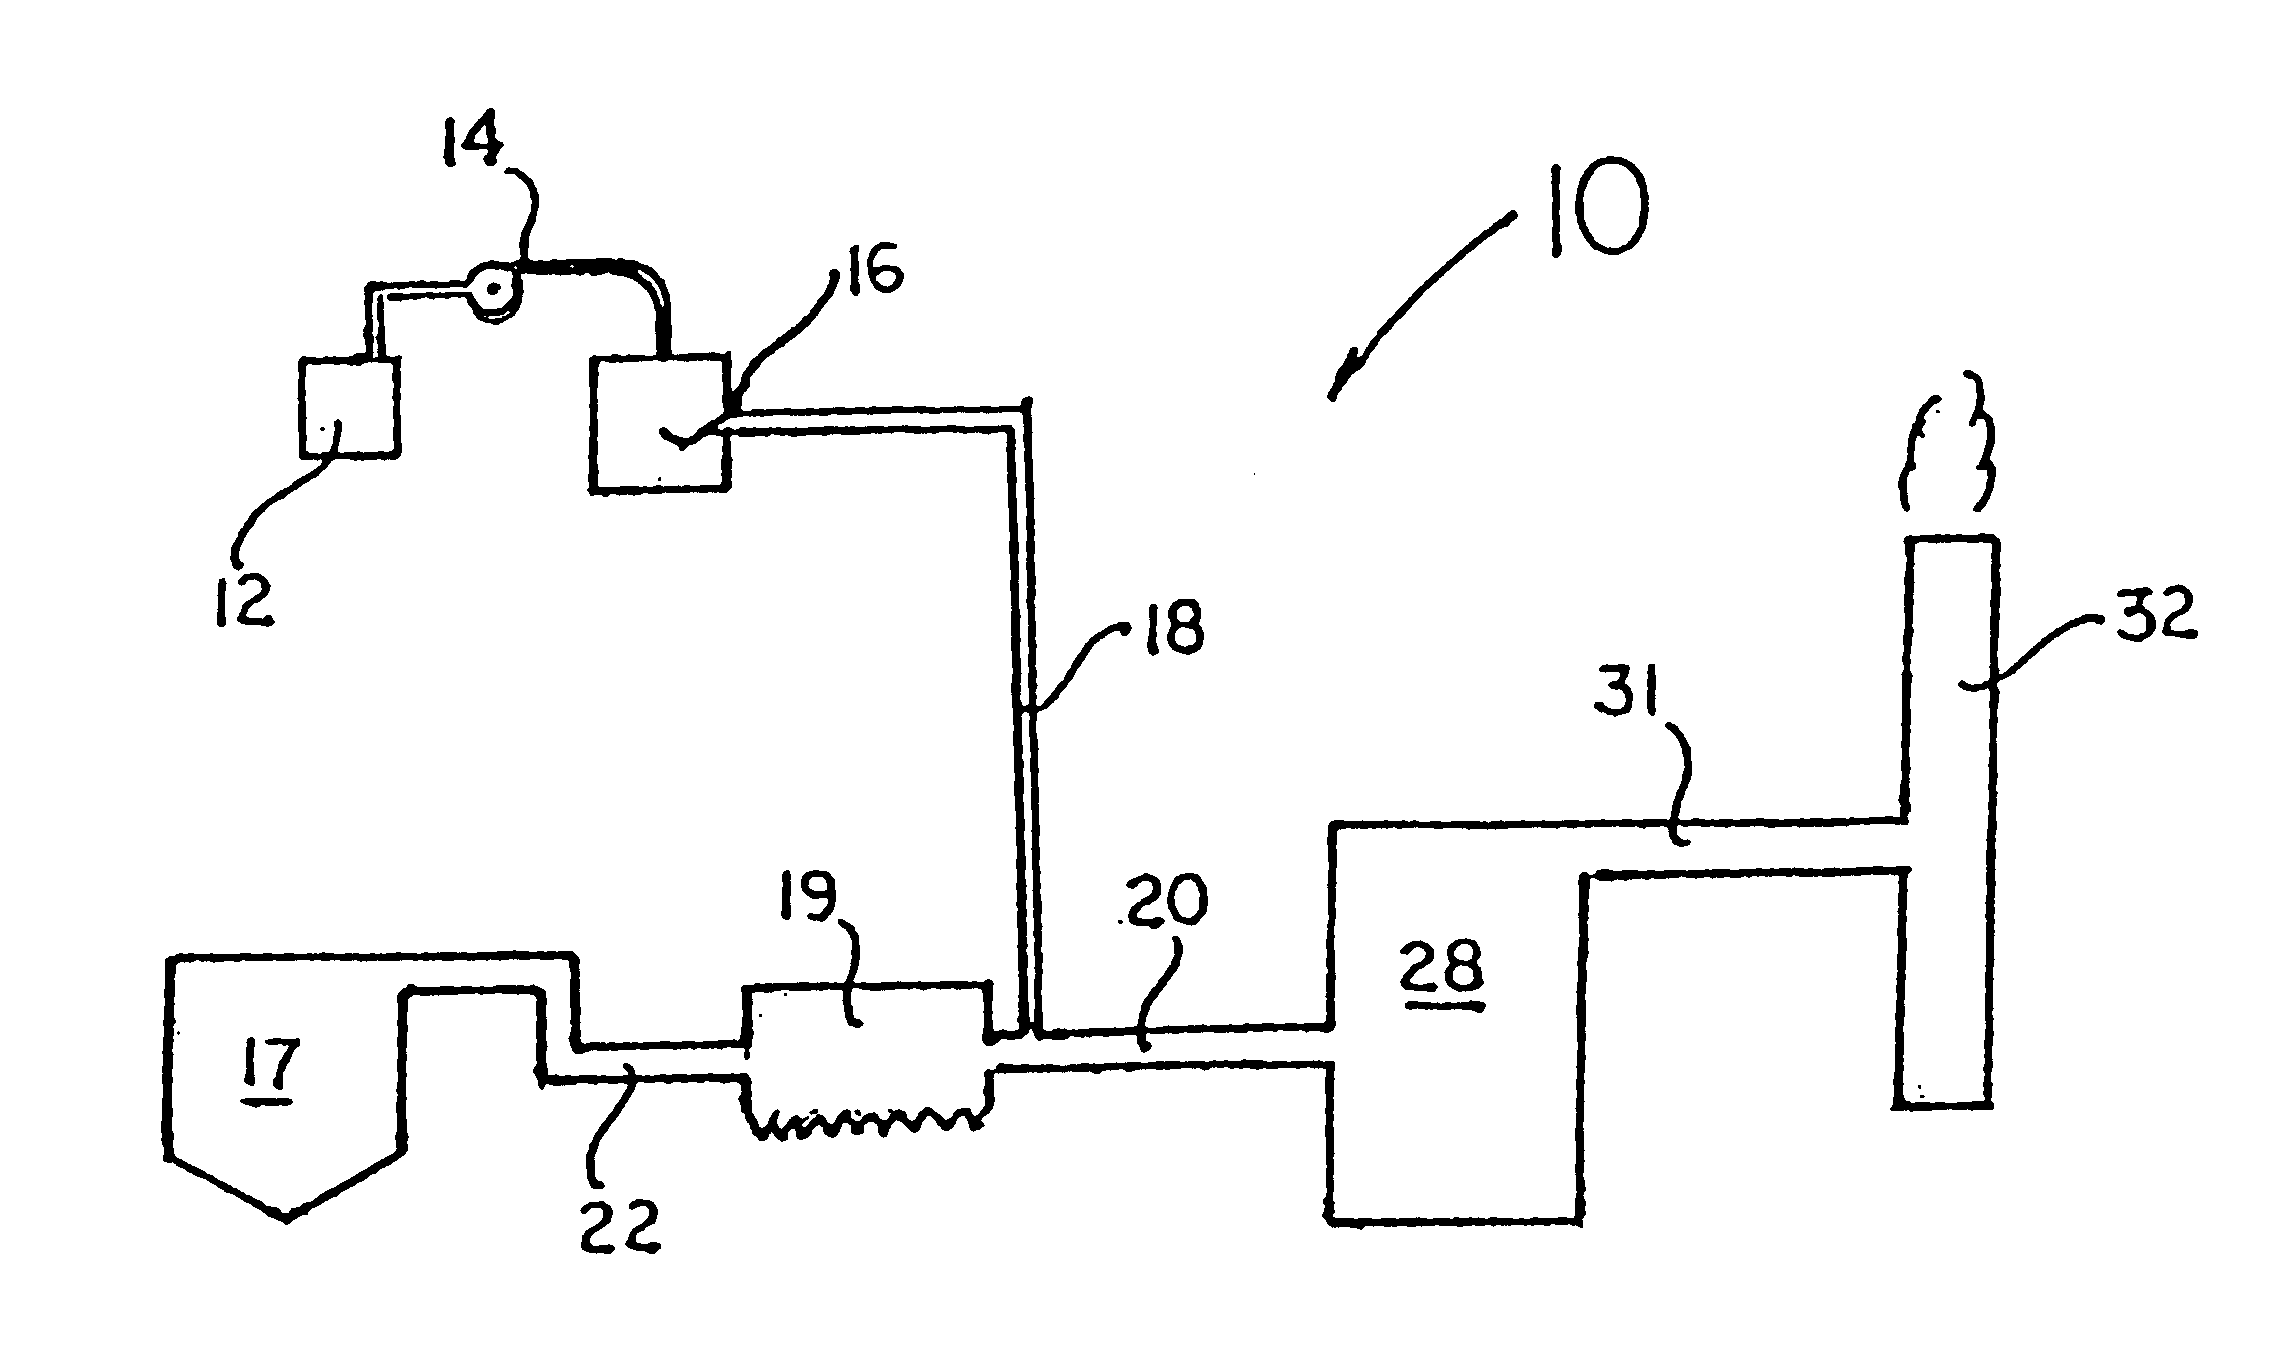 Method for combined removal of mercury and nitrogen oxides from off-gas streams